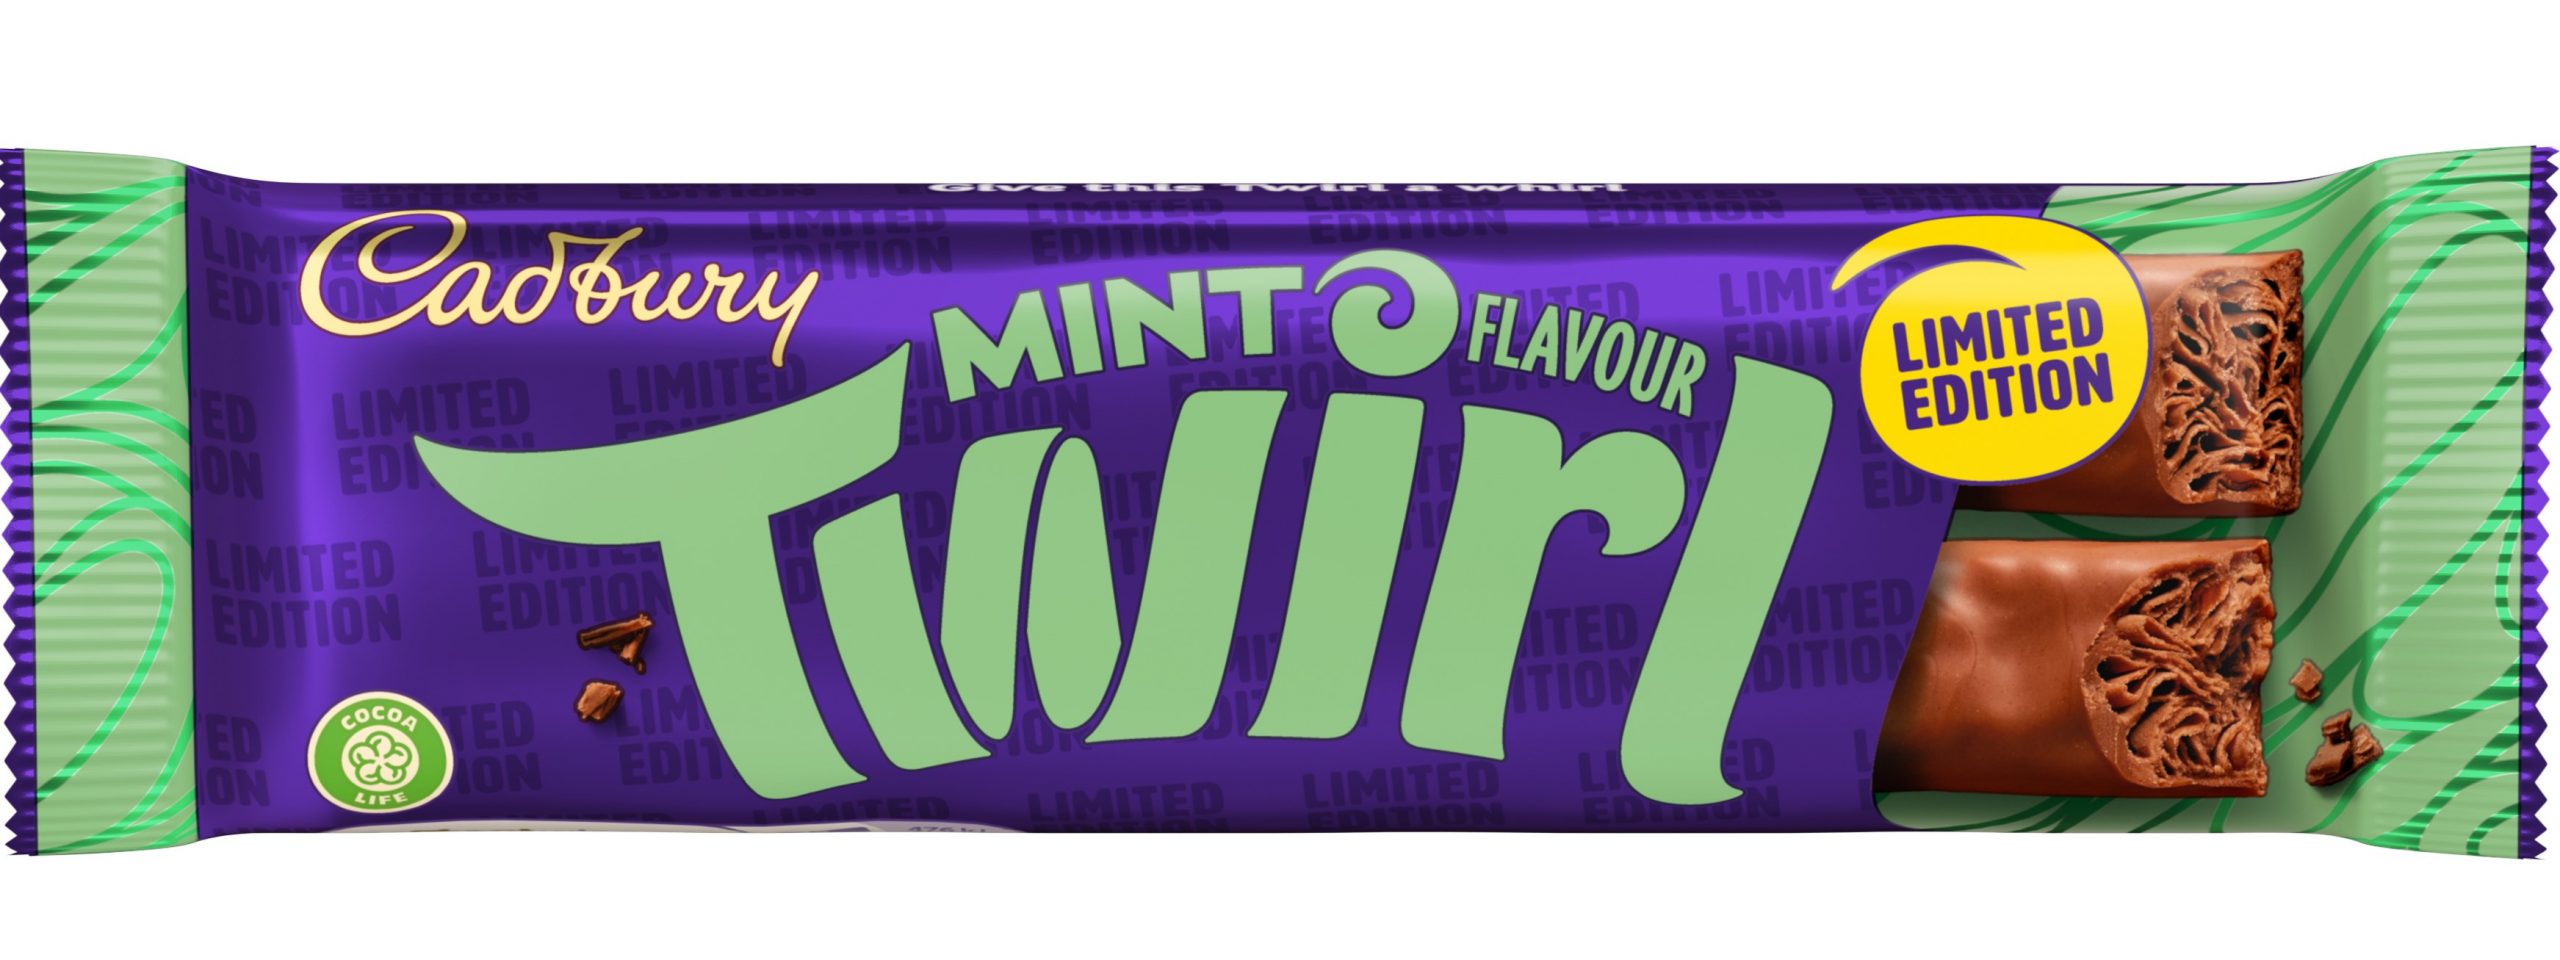 It was mint to be! Cadbury unwraps limited-edition Twirl flavour